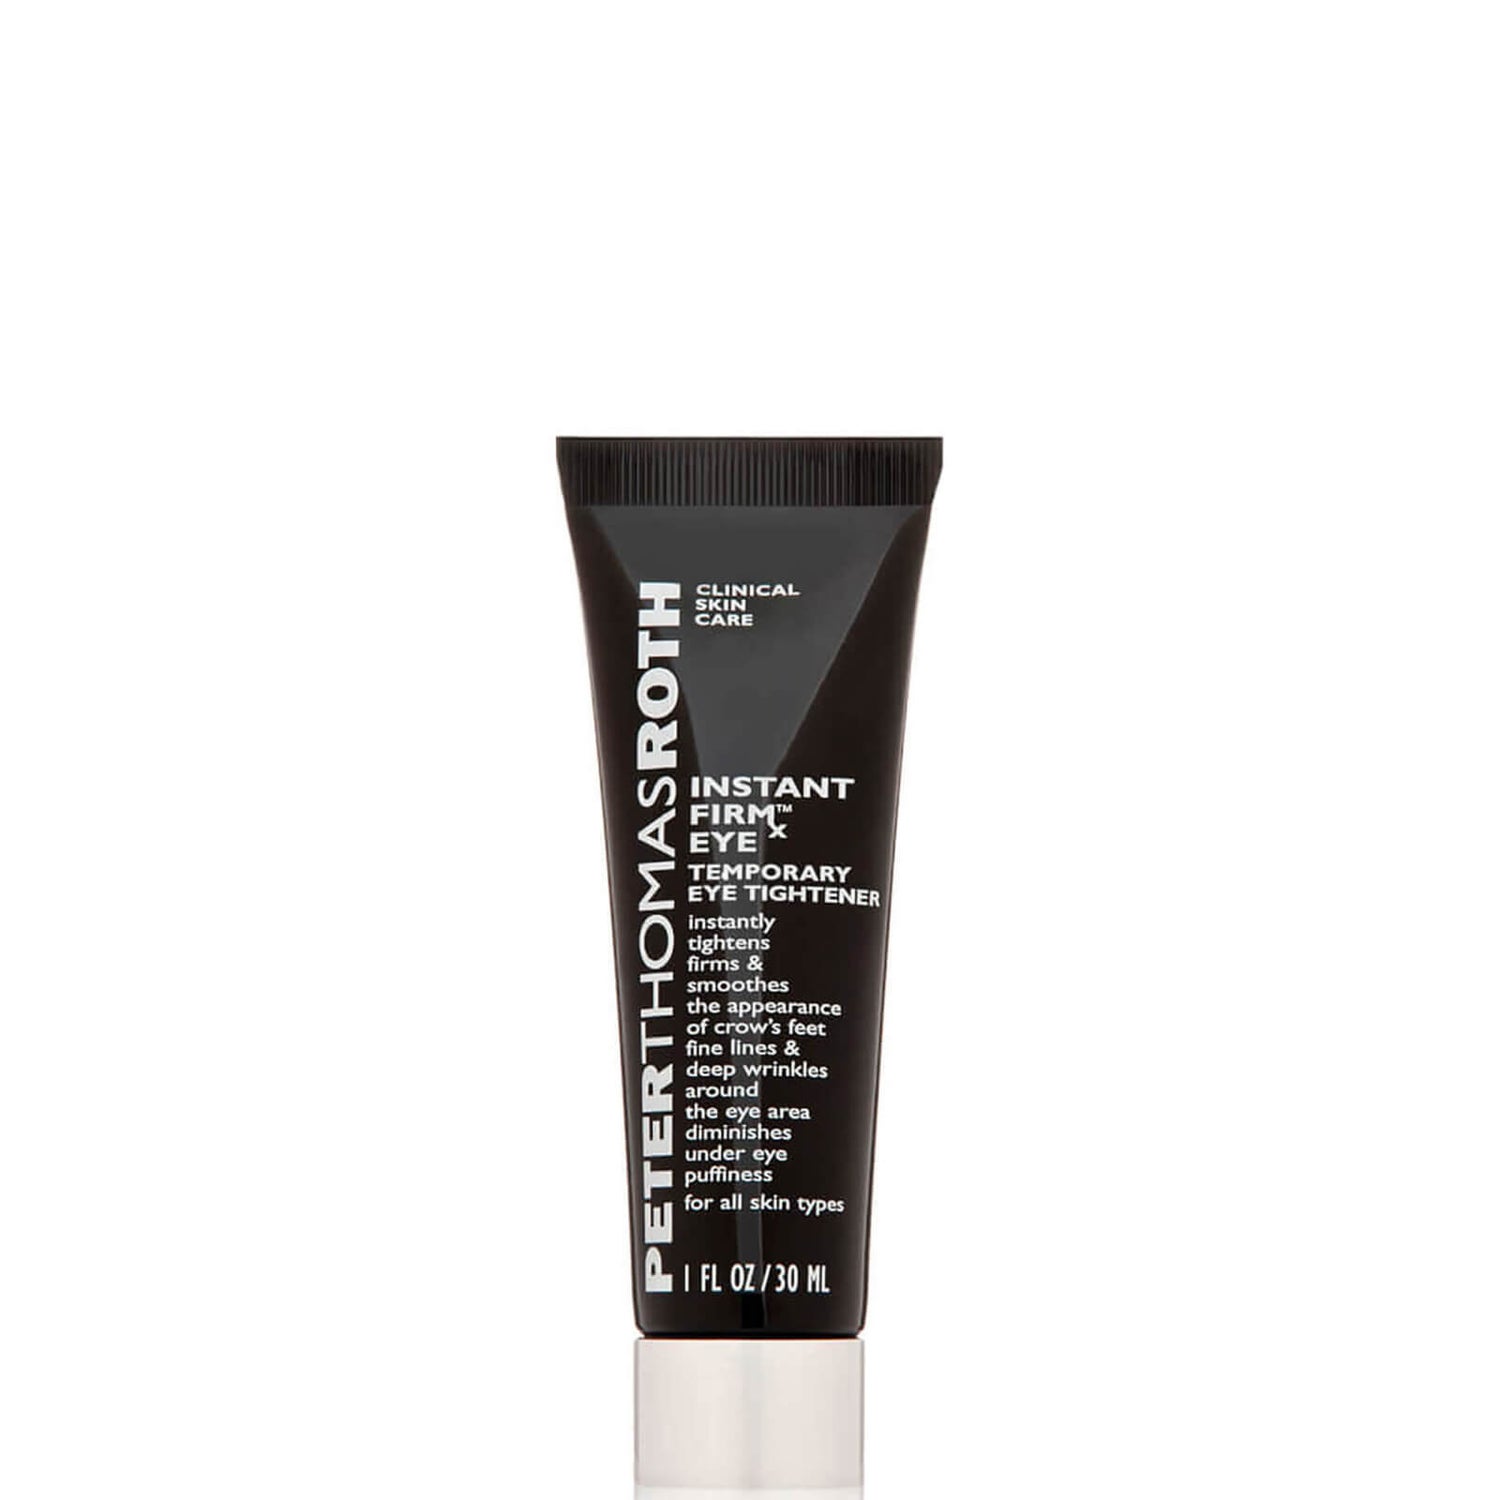 Peter Thomas Roth Instant FirmX Eye - FREE Delivery